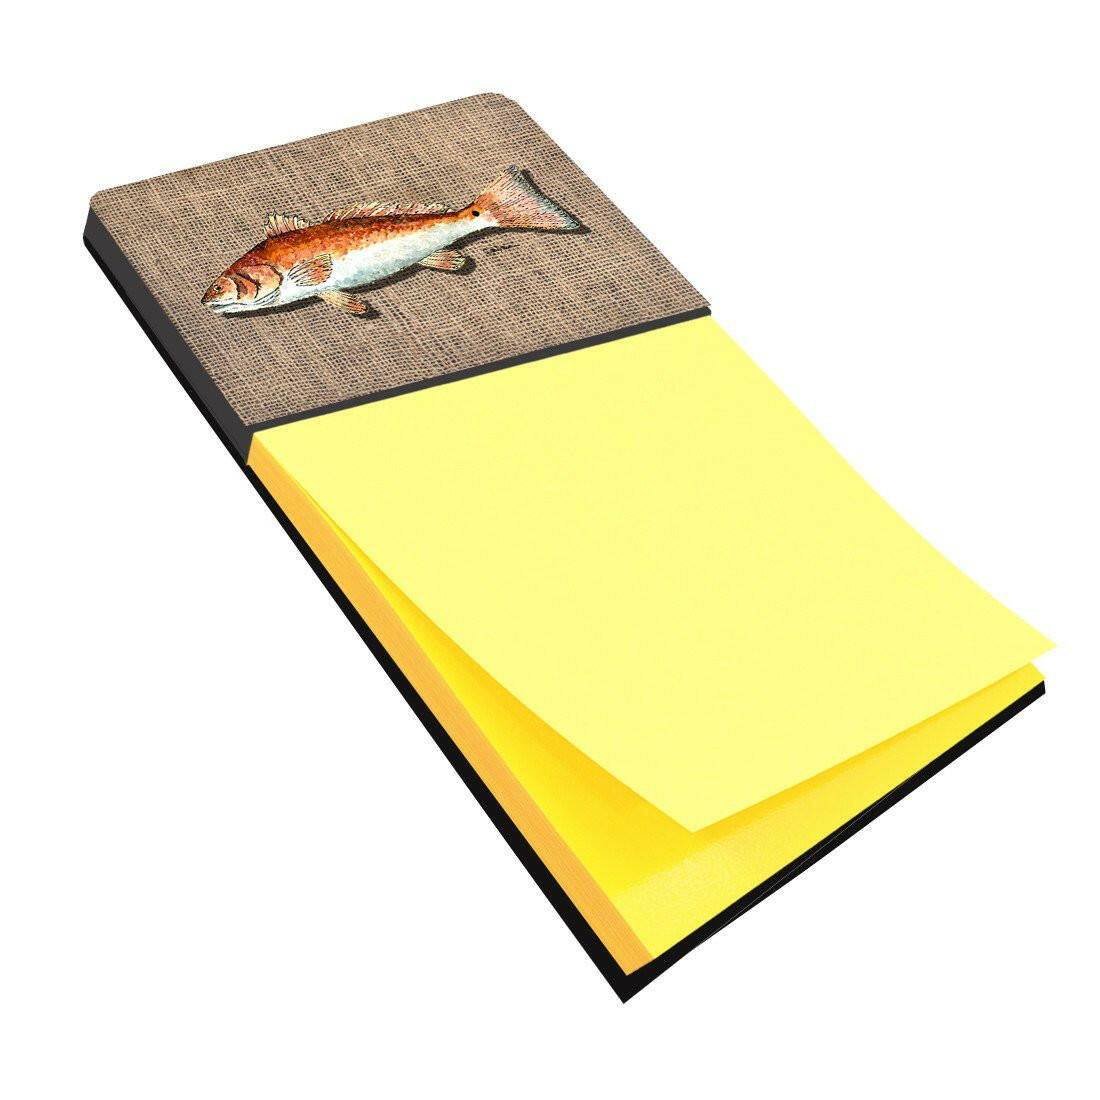 Red Fish Refiillable Sticky Note Holder or Postit Note Dispenser 8736SN by Caroline's Treasures